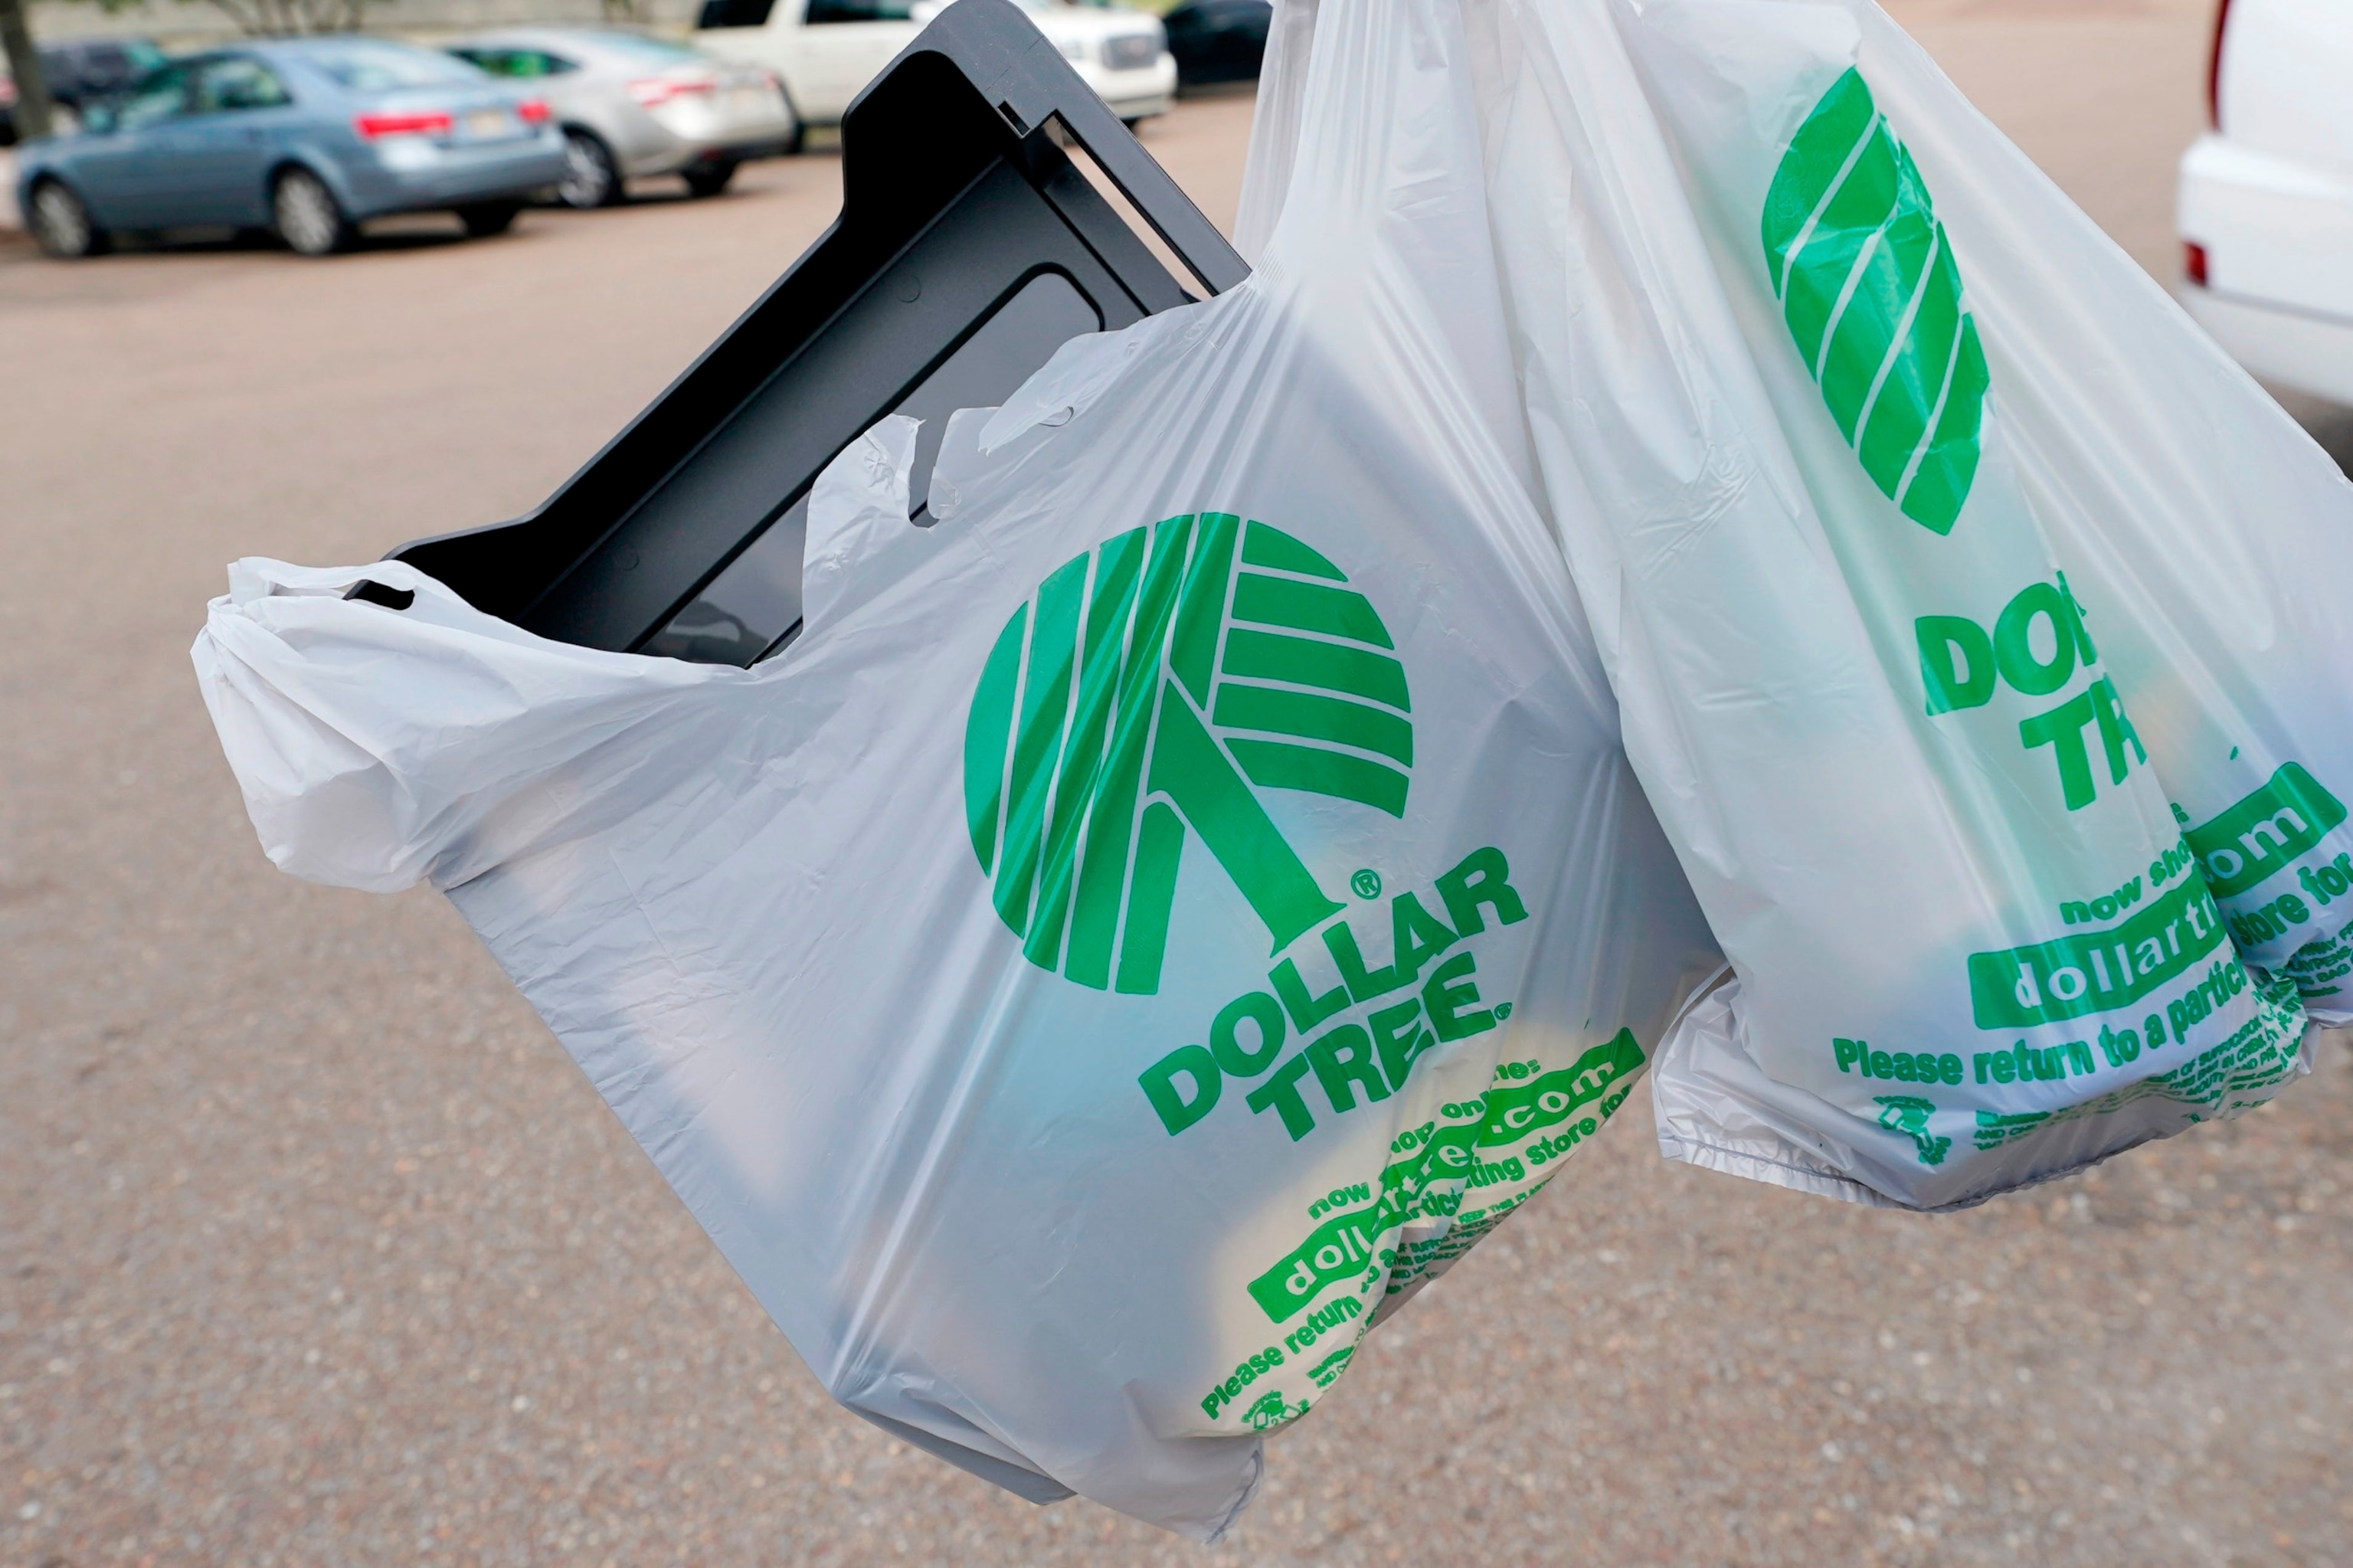 PHOTO: A customer exits a Dollar Tree store holding a shopping bag, May 11, 2022, in Jackson, Miss.